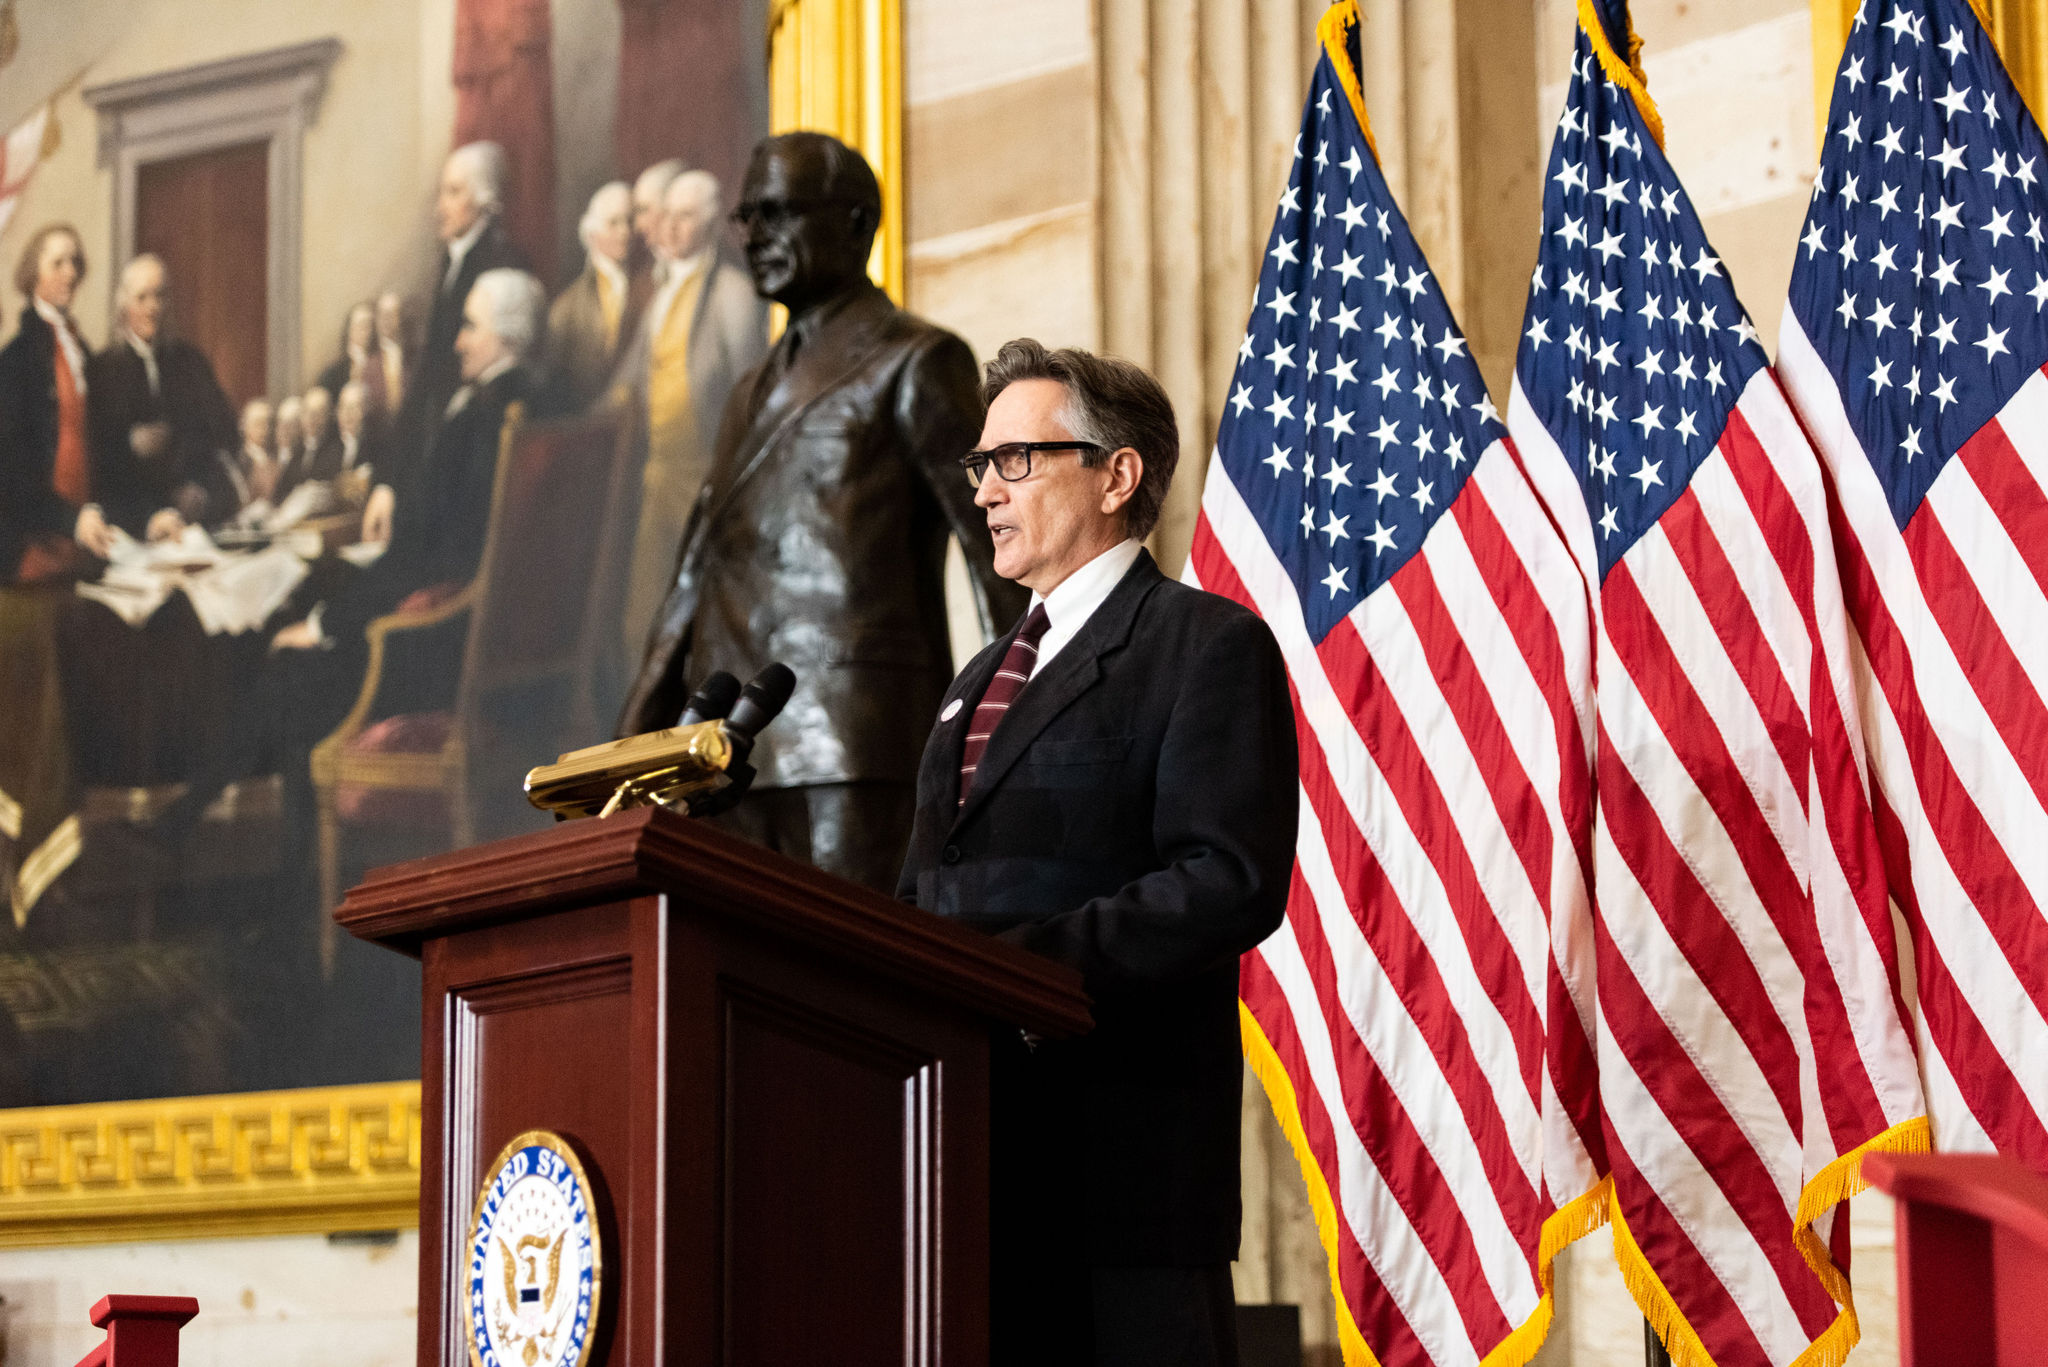 Clifton Truman Daniel at the unveiling and dedication of the Truman Statue in the U.S. Capitol Rotunda